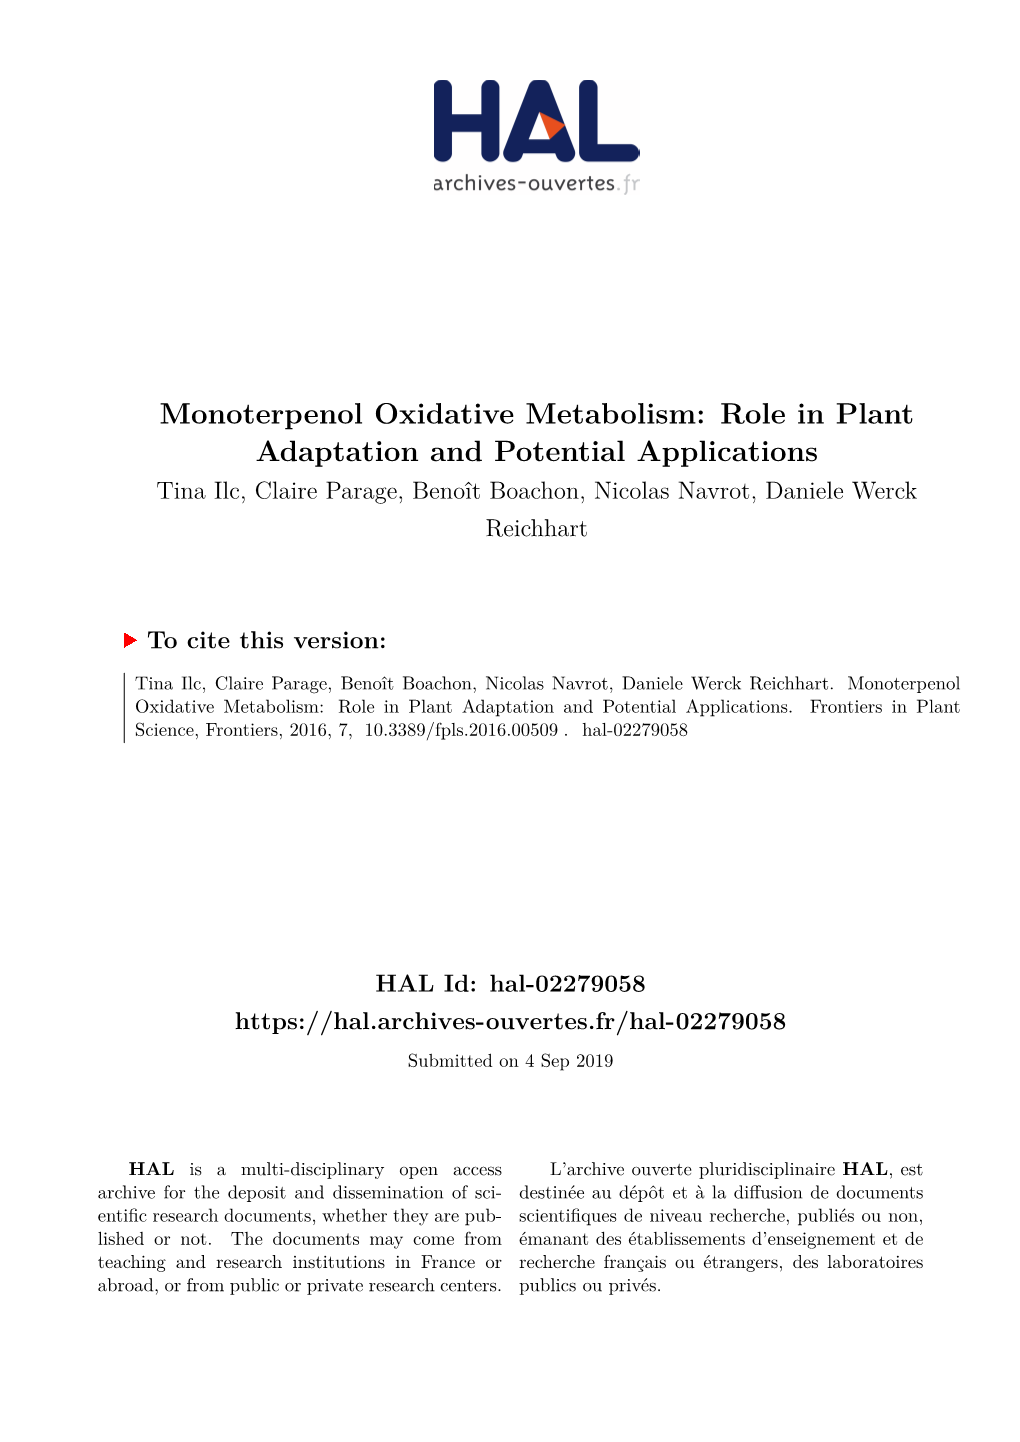 Monoterpenol Oxidative Metabolism: Role in Plant Adaptation And